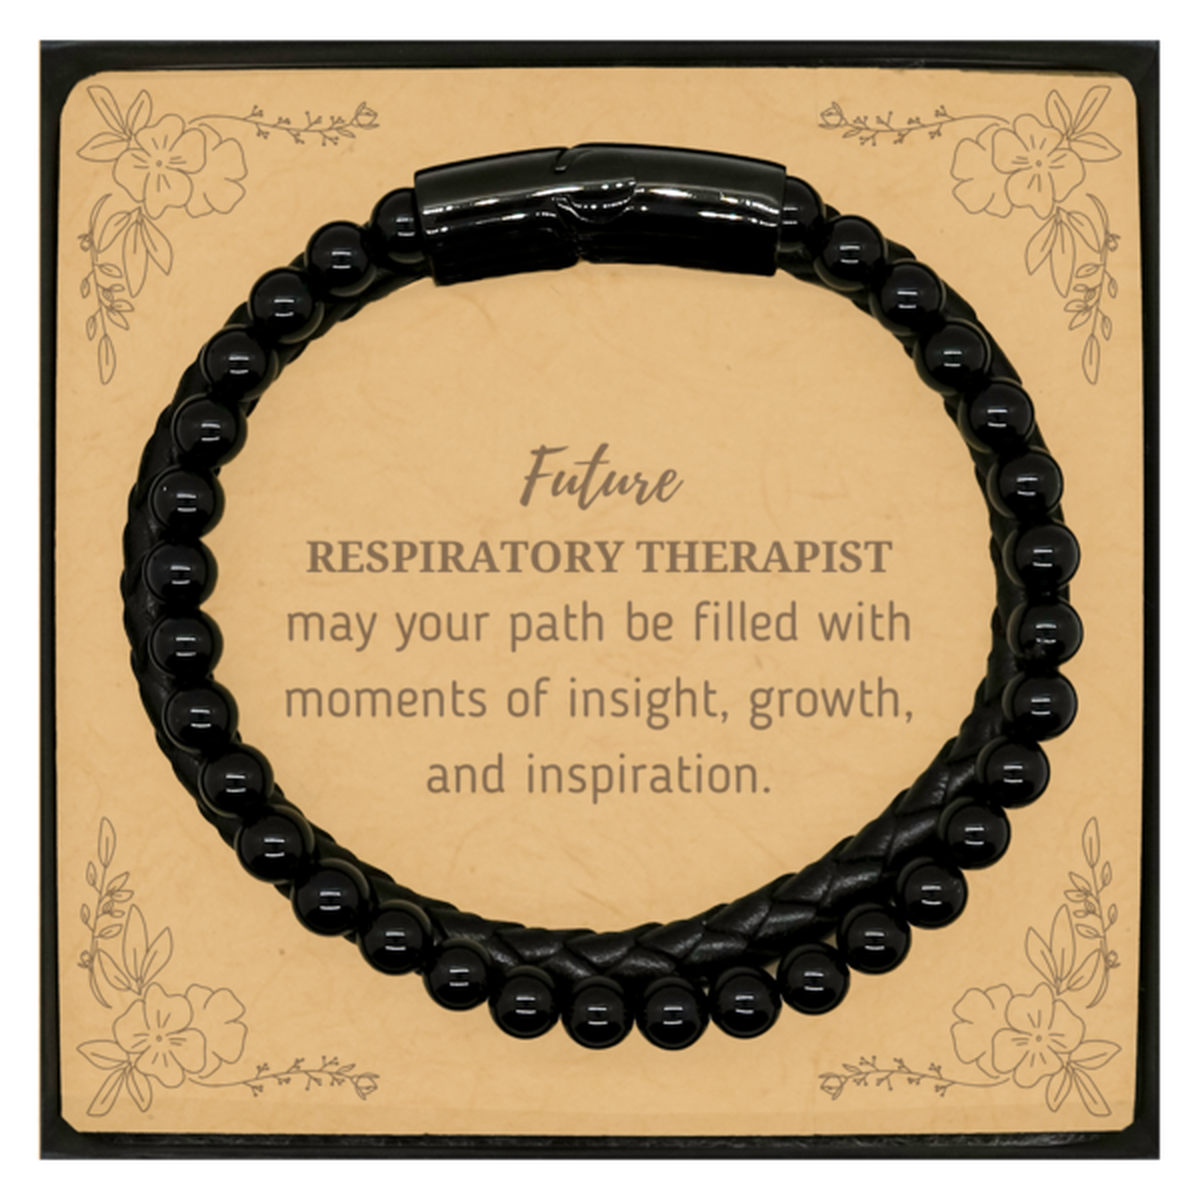 Future Respiratory Therapist Gifts, May your path be filled with moments of insight, Graduation Gifts for New Respiratory Therapist, Christmas Unique Stone Leather Bracelets For Men, Women, Friends